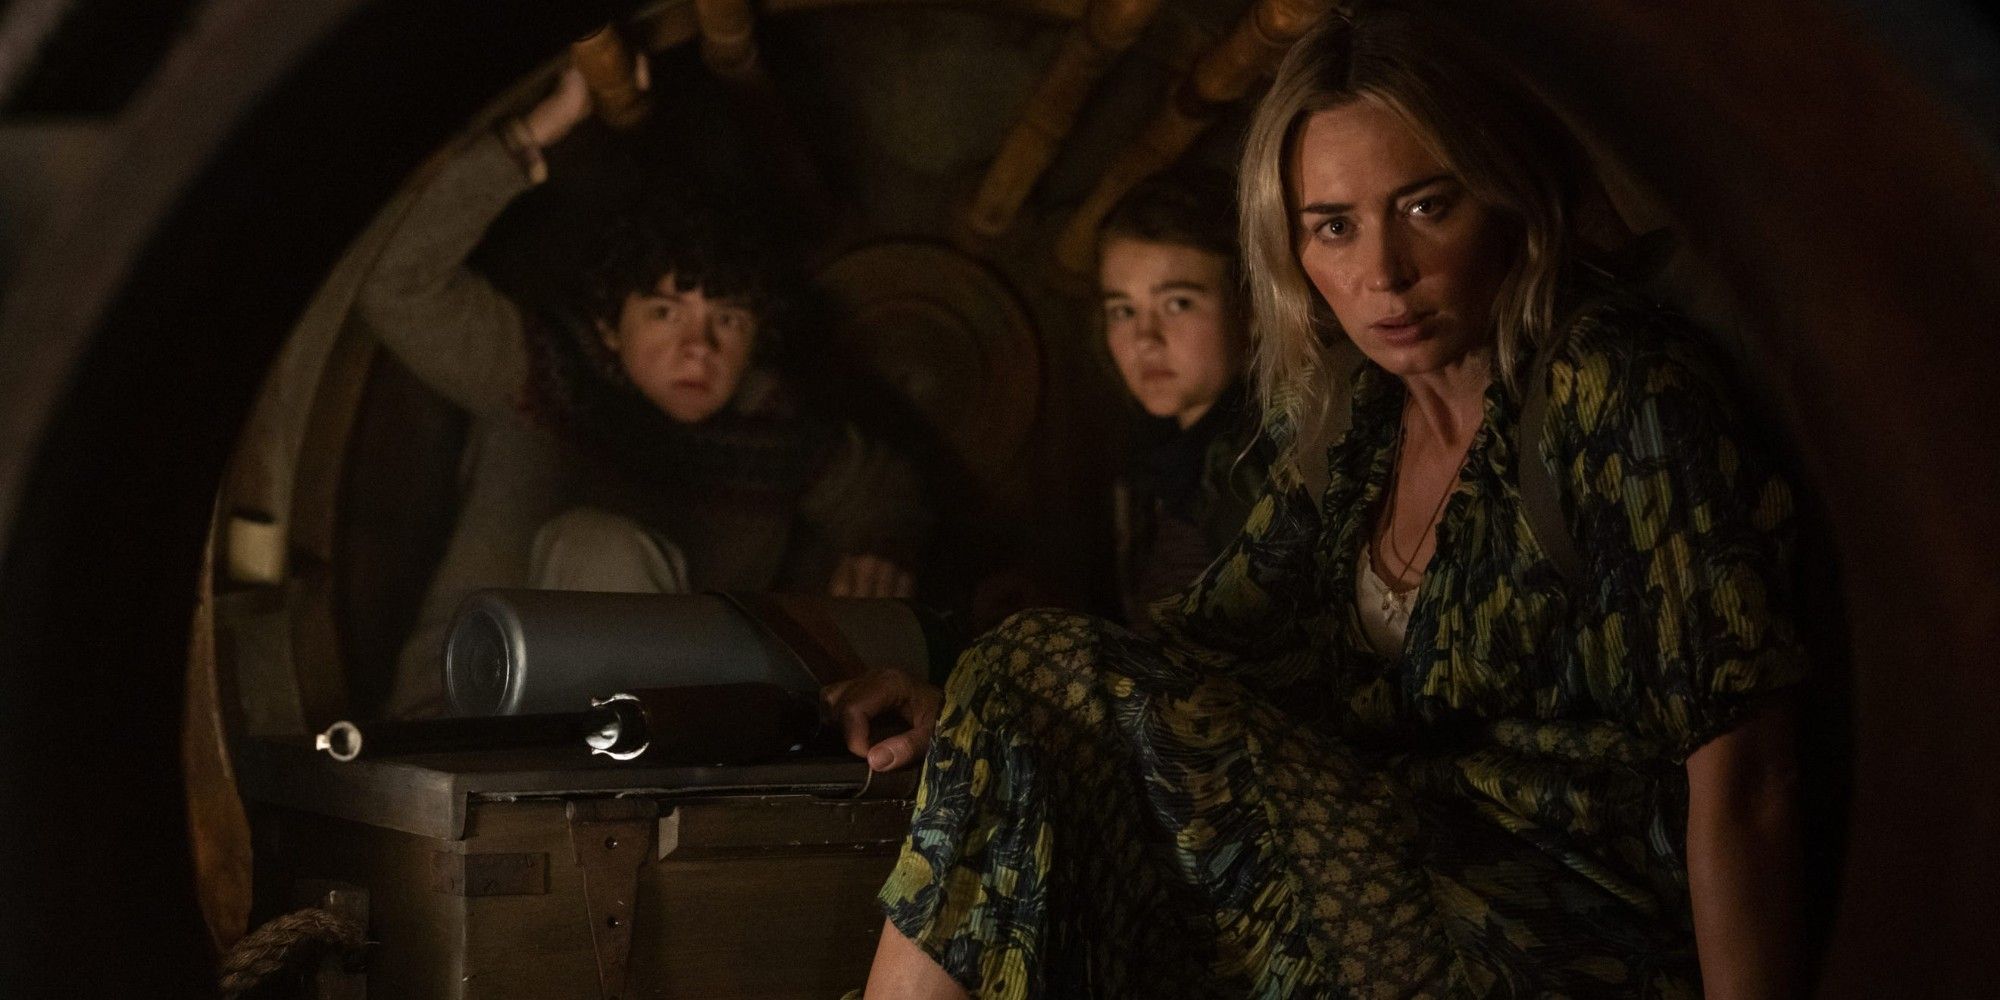 What To Expect From A Quiet Place 3